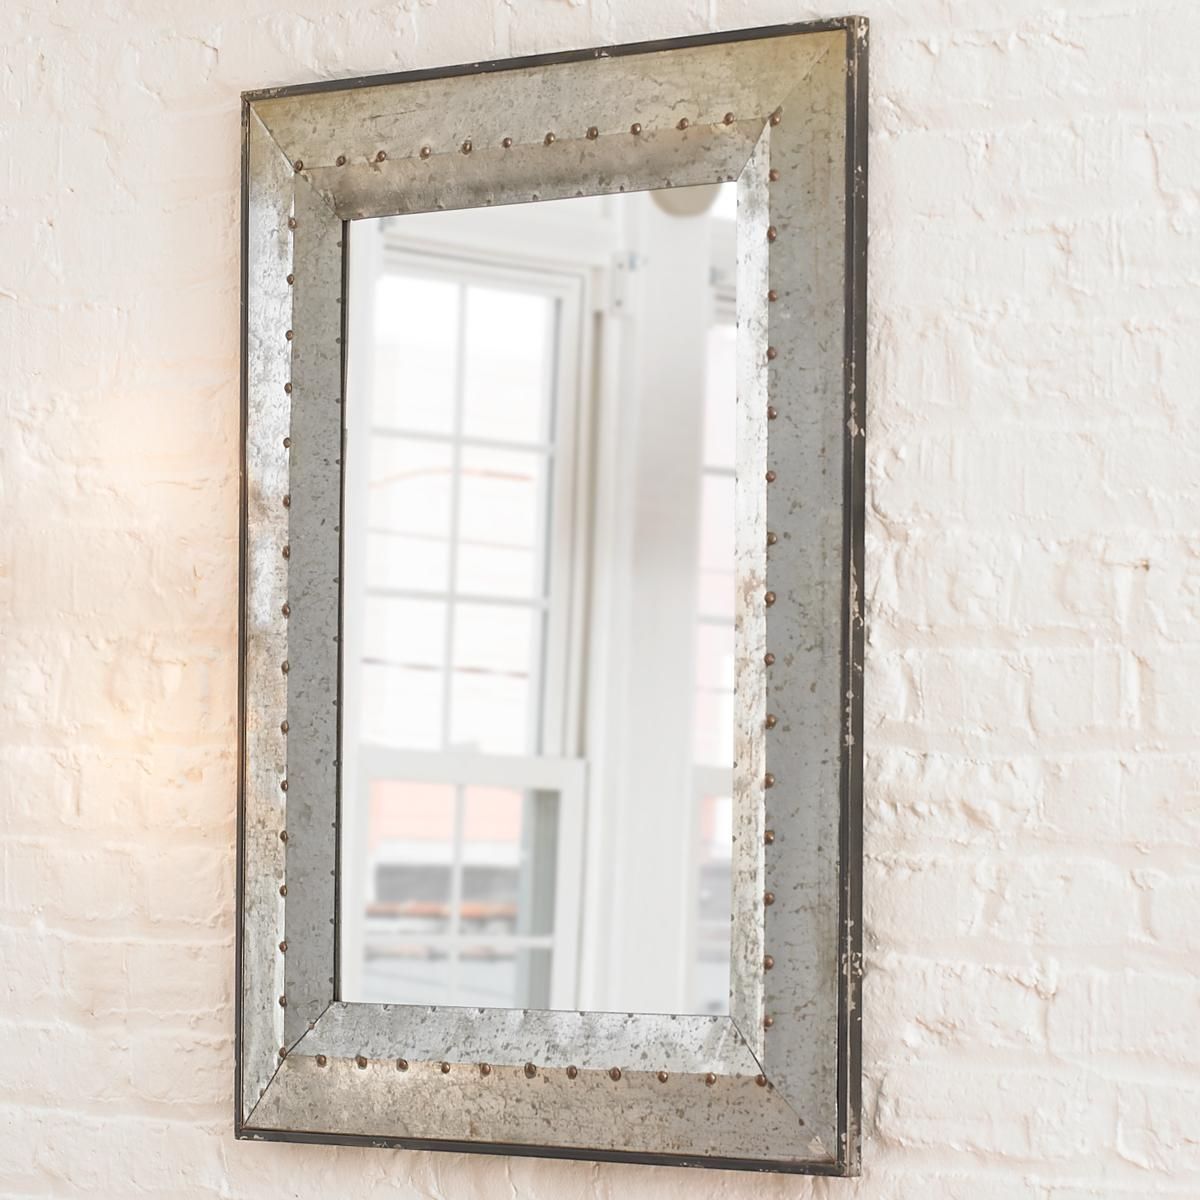 Mordern Minimalist Mirror | Modern Rustic Luxe | Industrial Pertaining To Rectangle Antique Galvanized Metal Accent Mirrors (View 11 of 20)